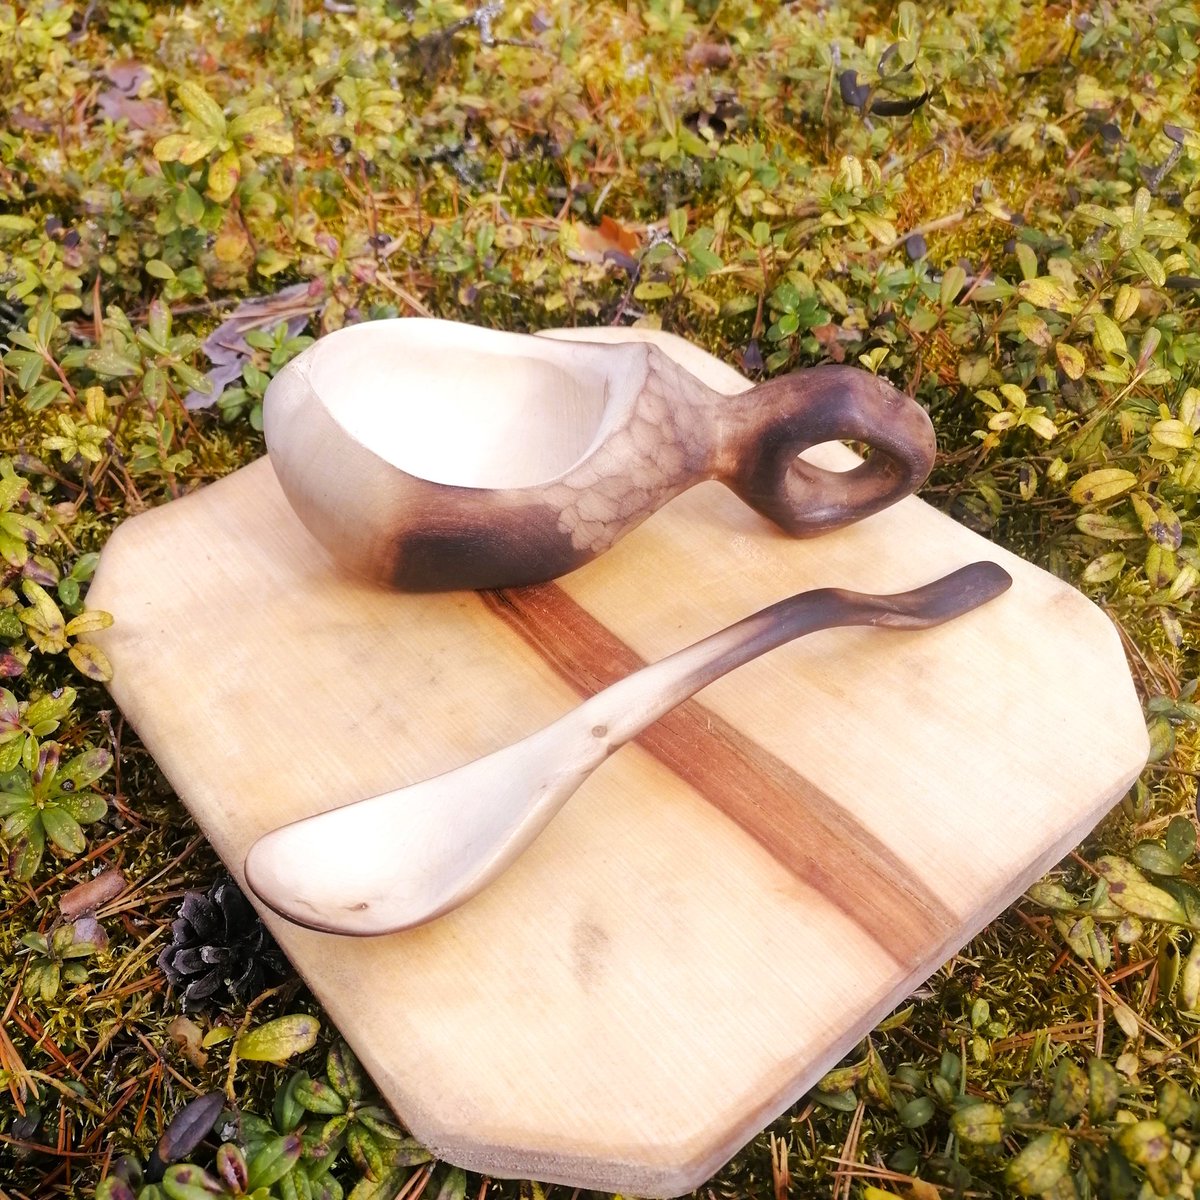 Kuksa with spoon hand carved in birch wood by Witaberget from Sweden
witaberget.etsy.com/listing/158682…
#bushcraft #outdoor #coffeecup